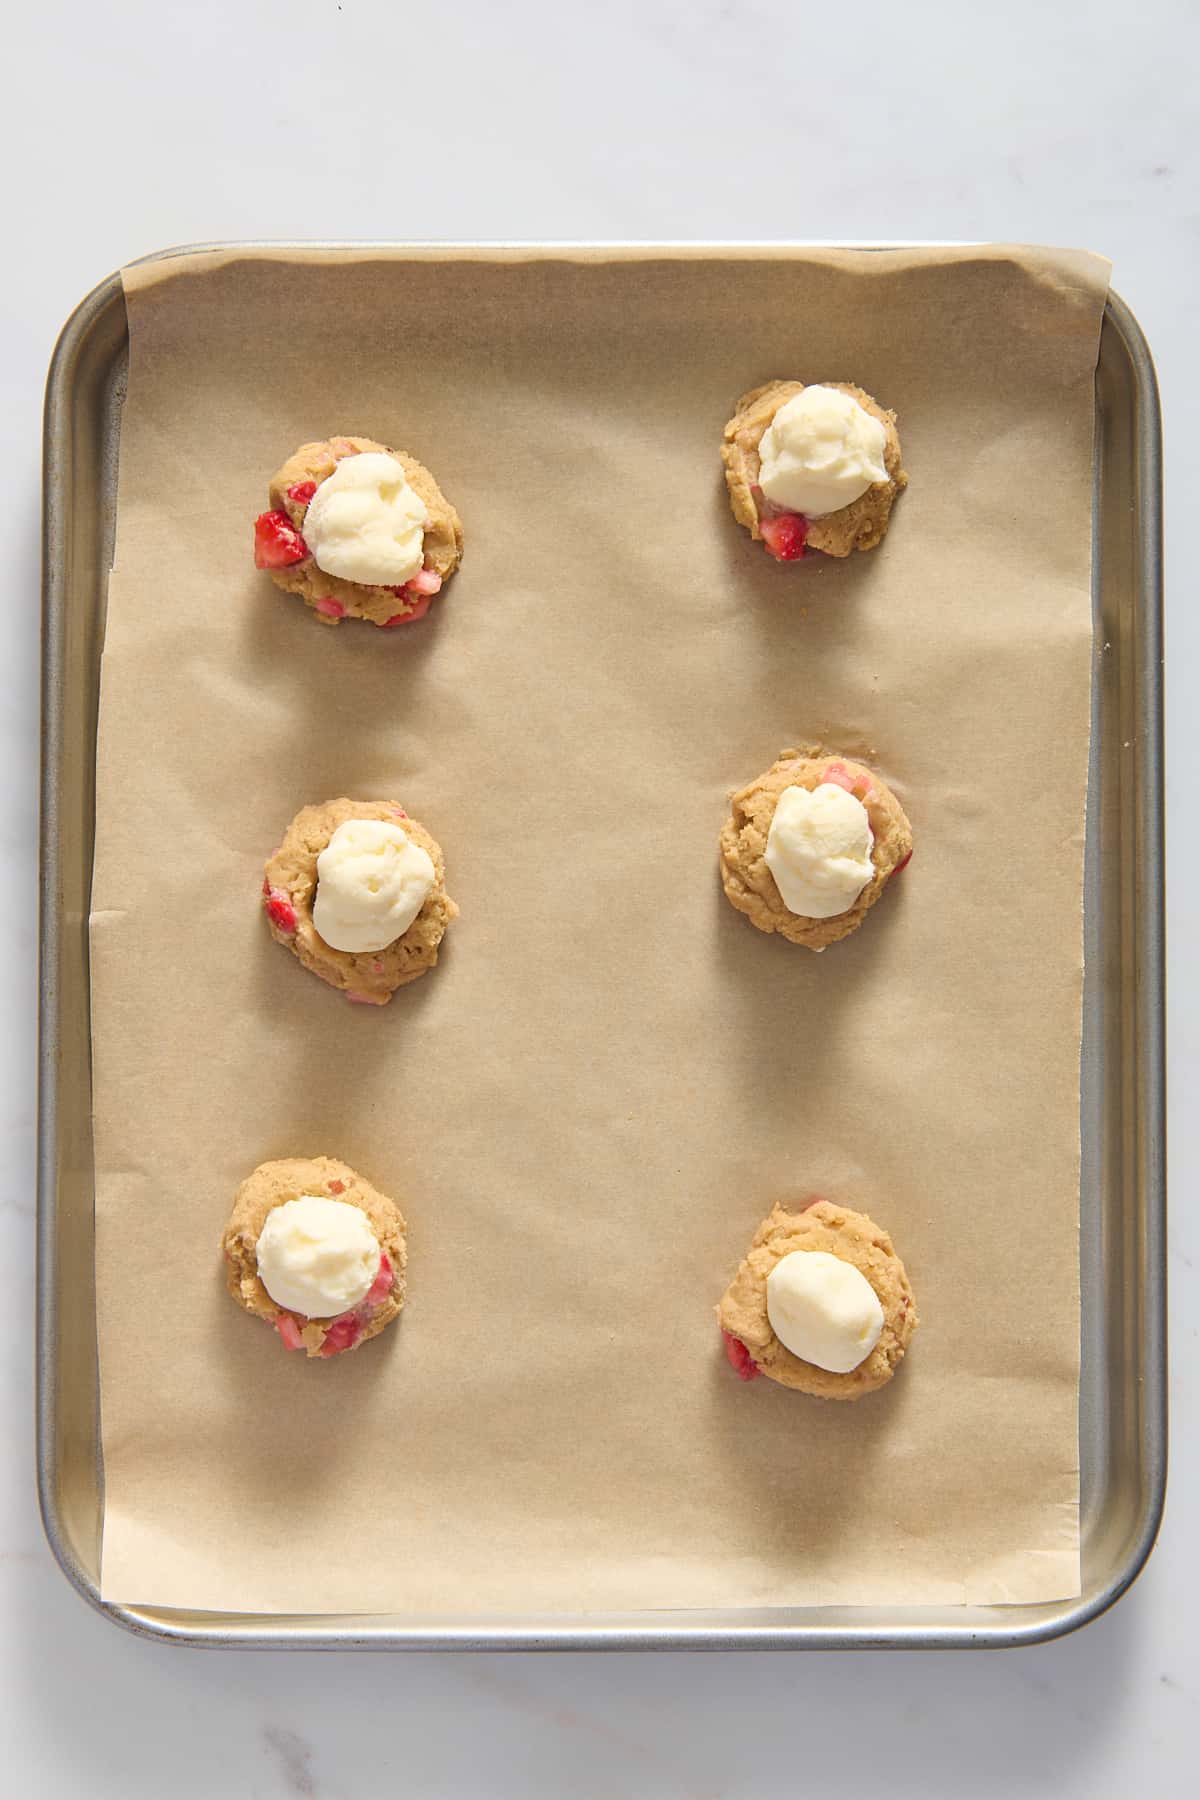 top down image of six strawberry cheesecake cookie dough balls with cream cheese filling prepared on a parchment-lined baking tray. 